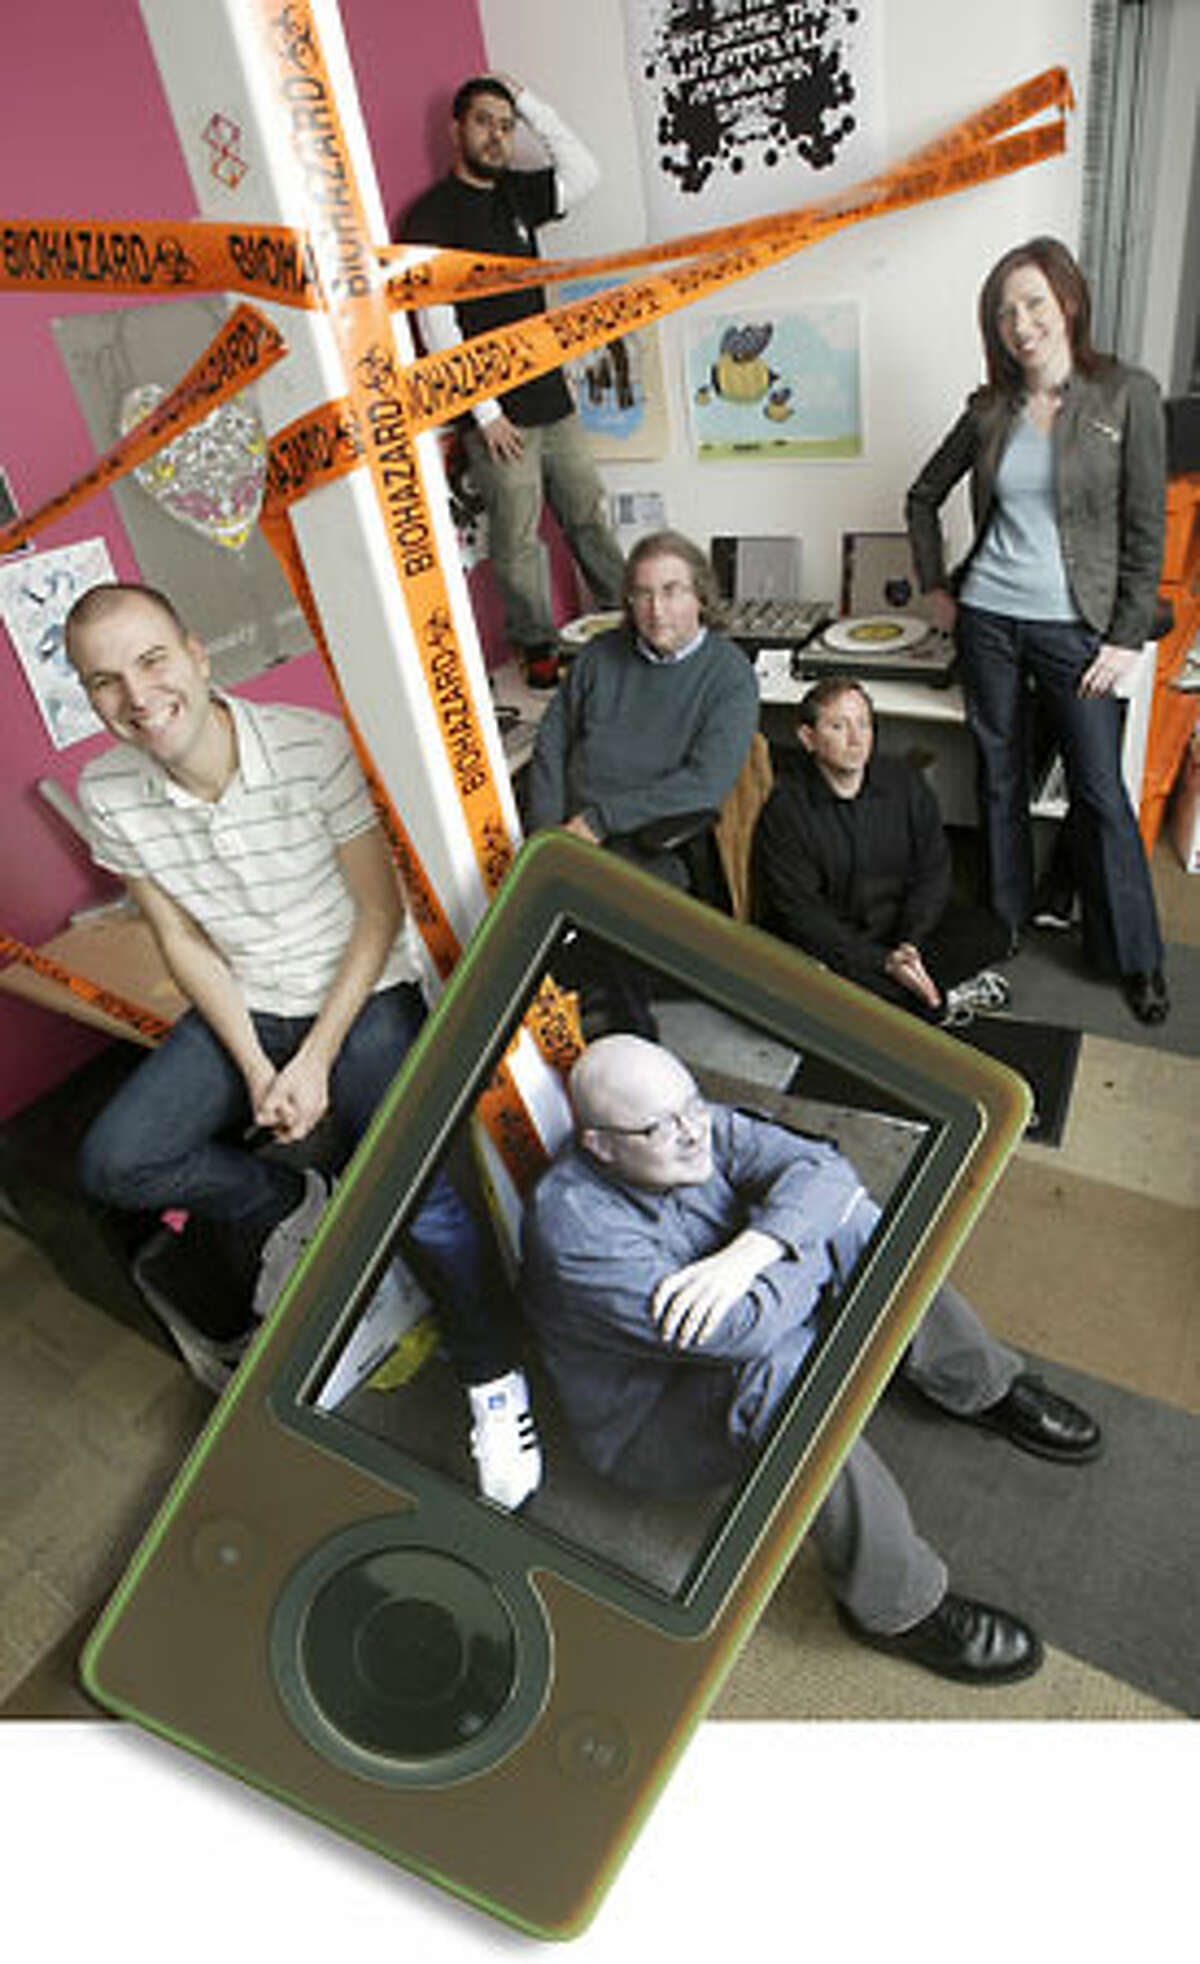 Zune Marketplace editorial team: Paul Pearson, in Zune. Behind him, from left, Kyle Hopkins, Omid Fatemi, Jon Kertzer, Andy Kessler and Emily Griffin.